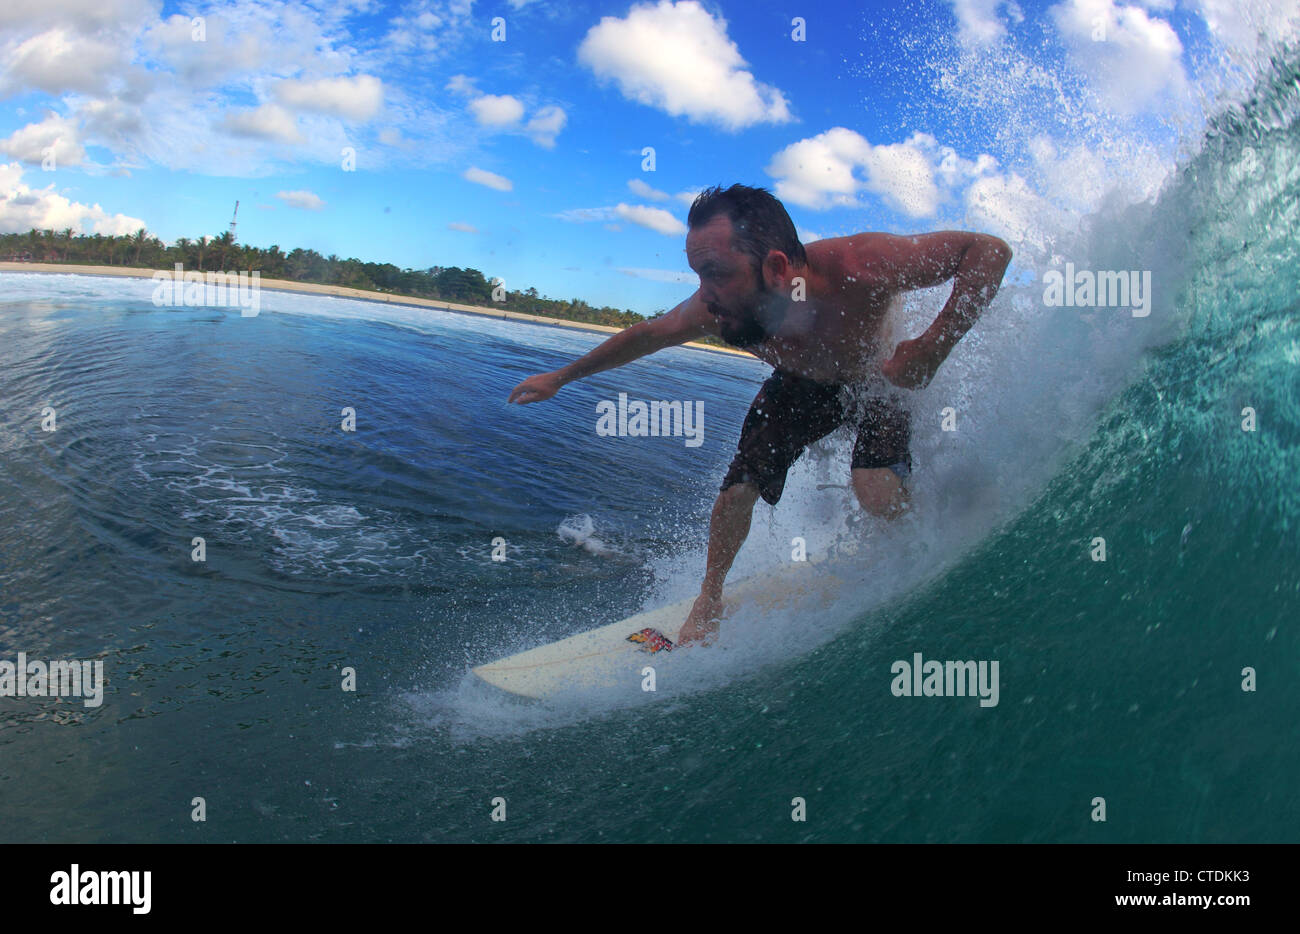 Water view of a tourist surfing in Krui, Sumatra. Stock Photo